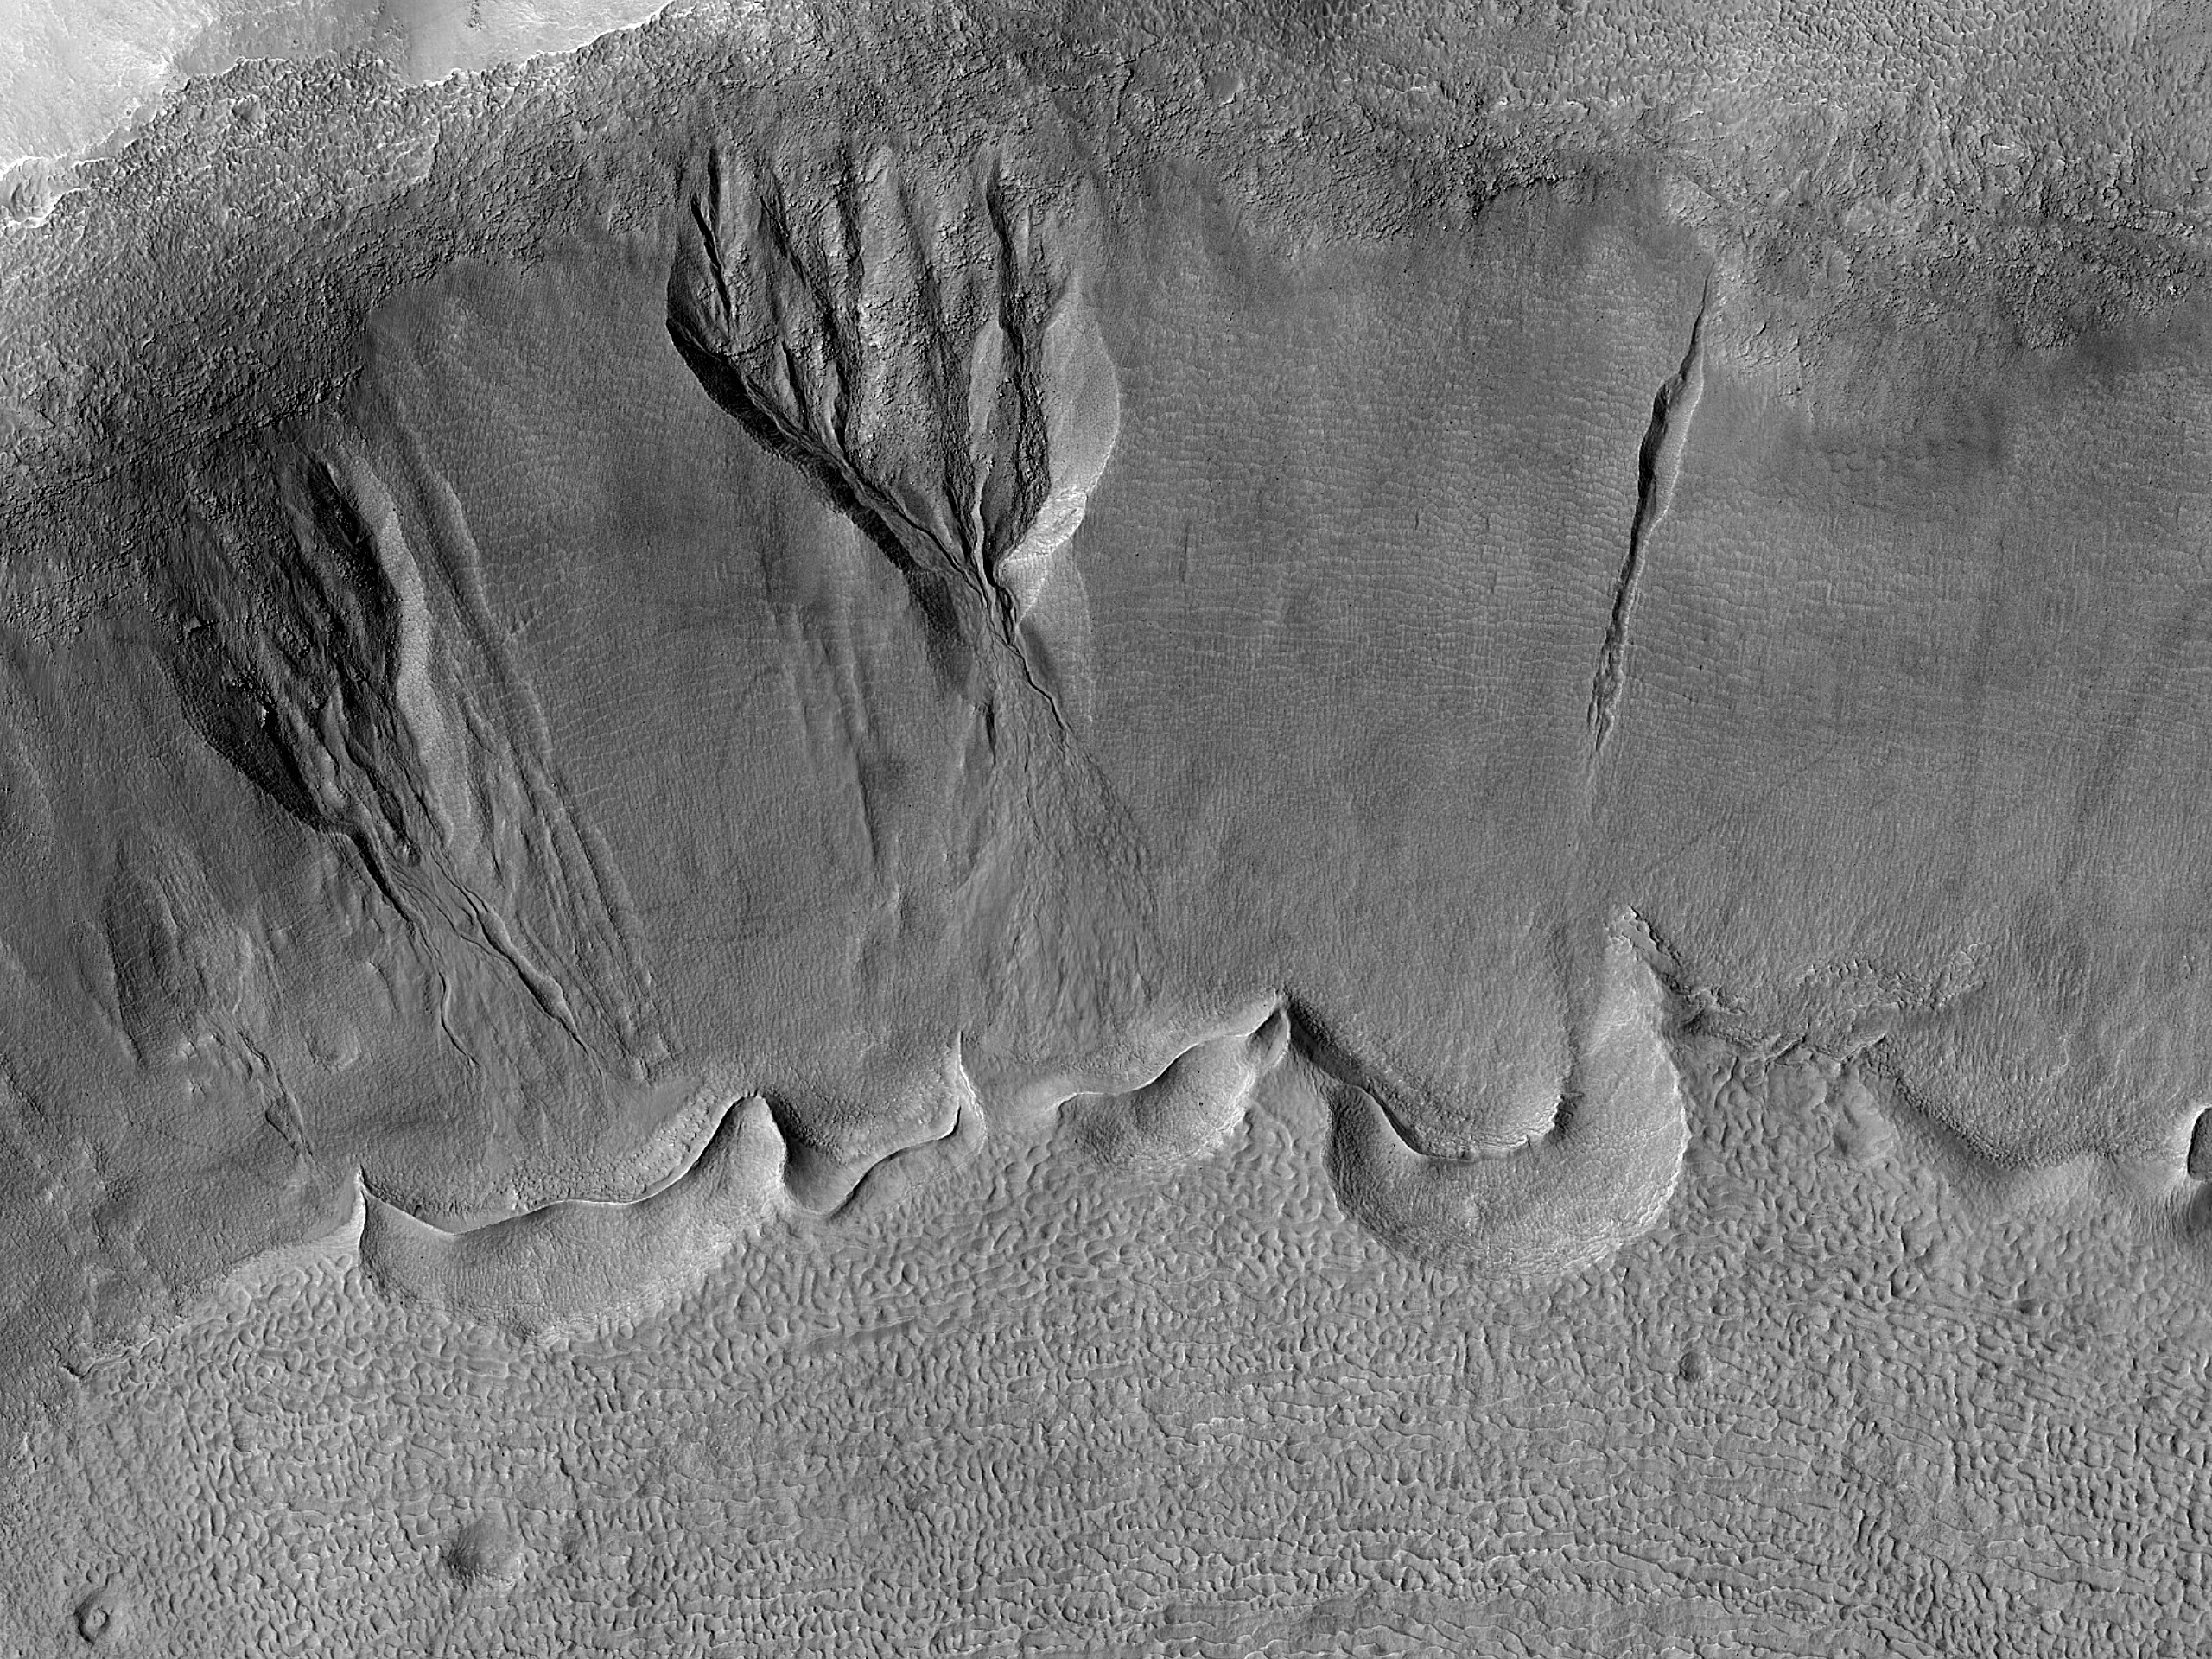 Gullies in a Crater near Newton Crater